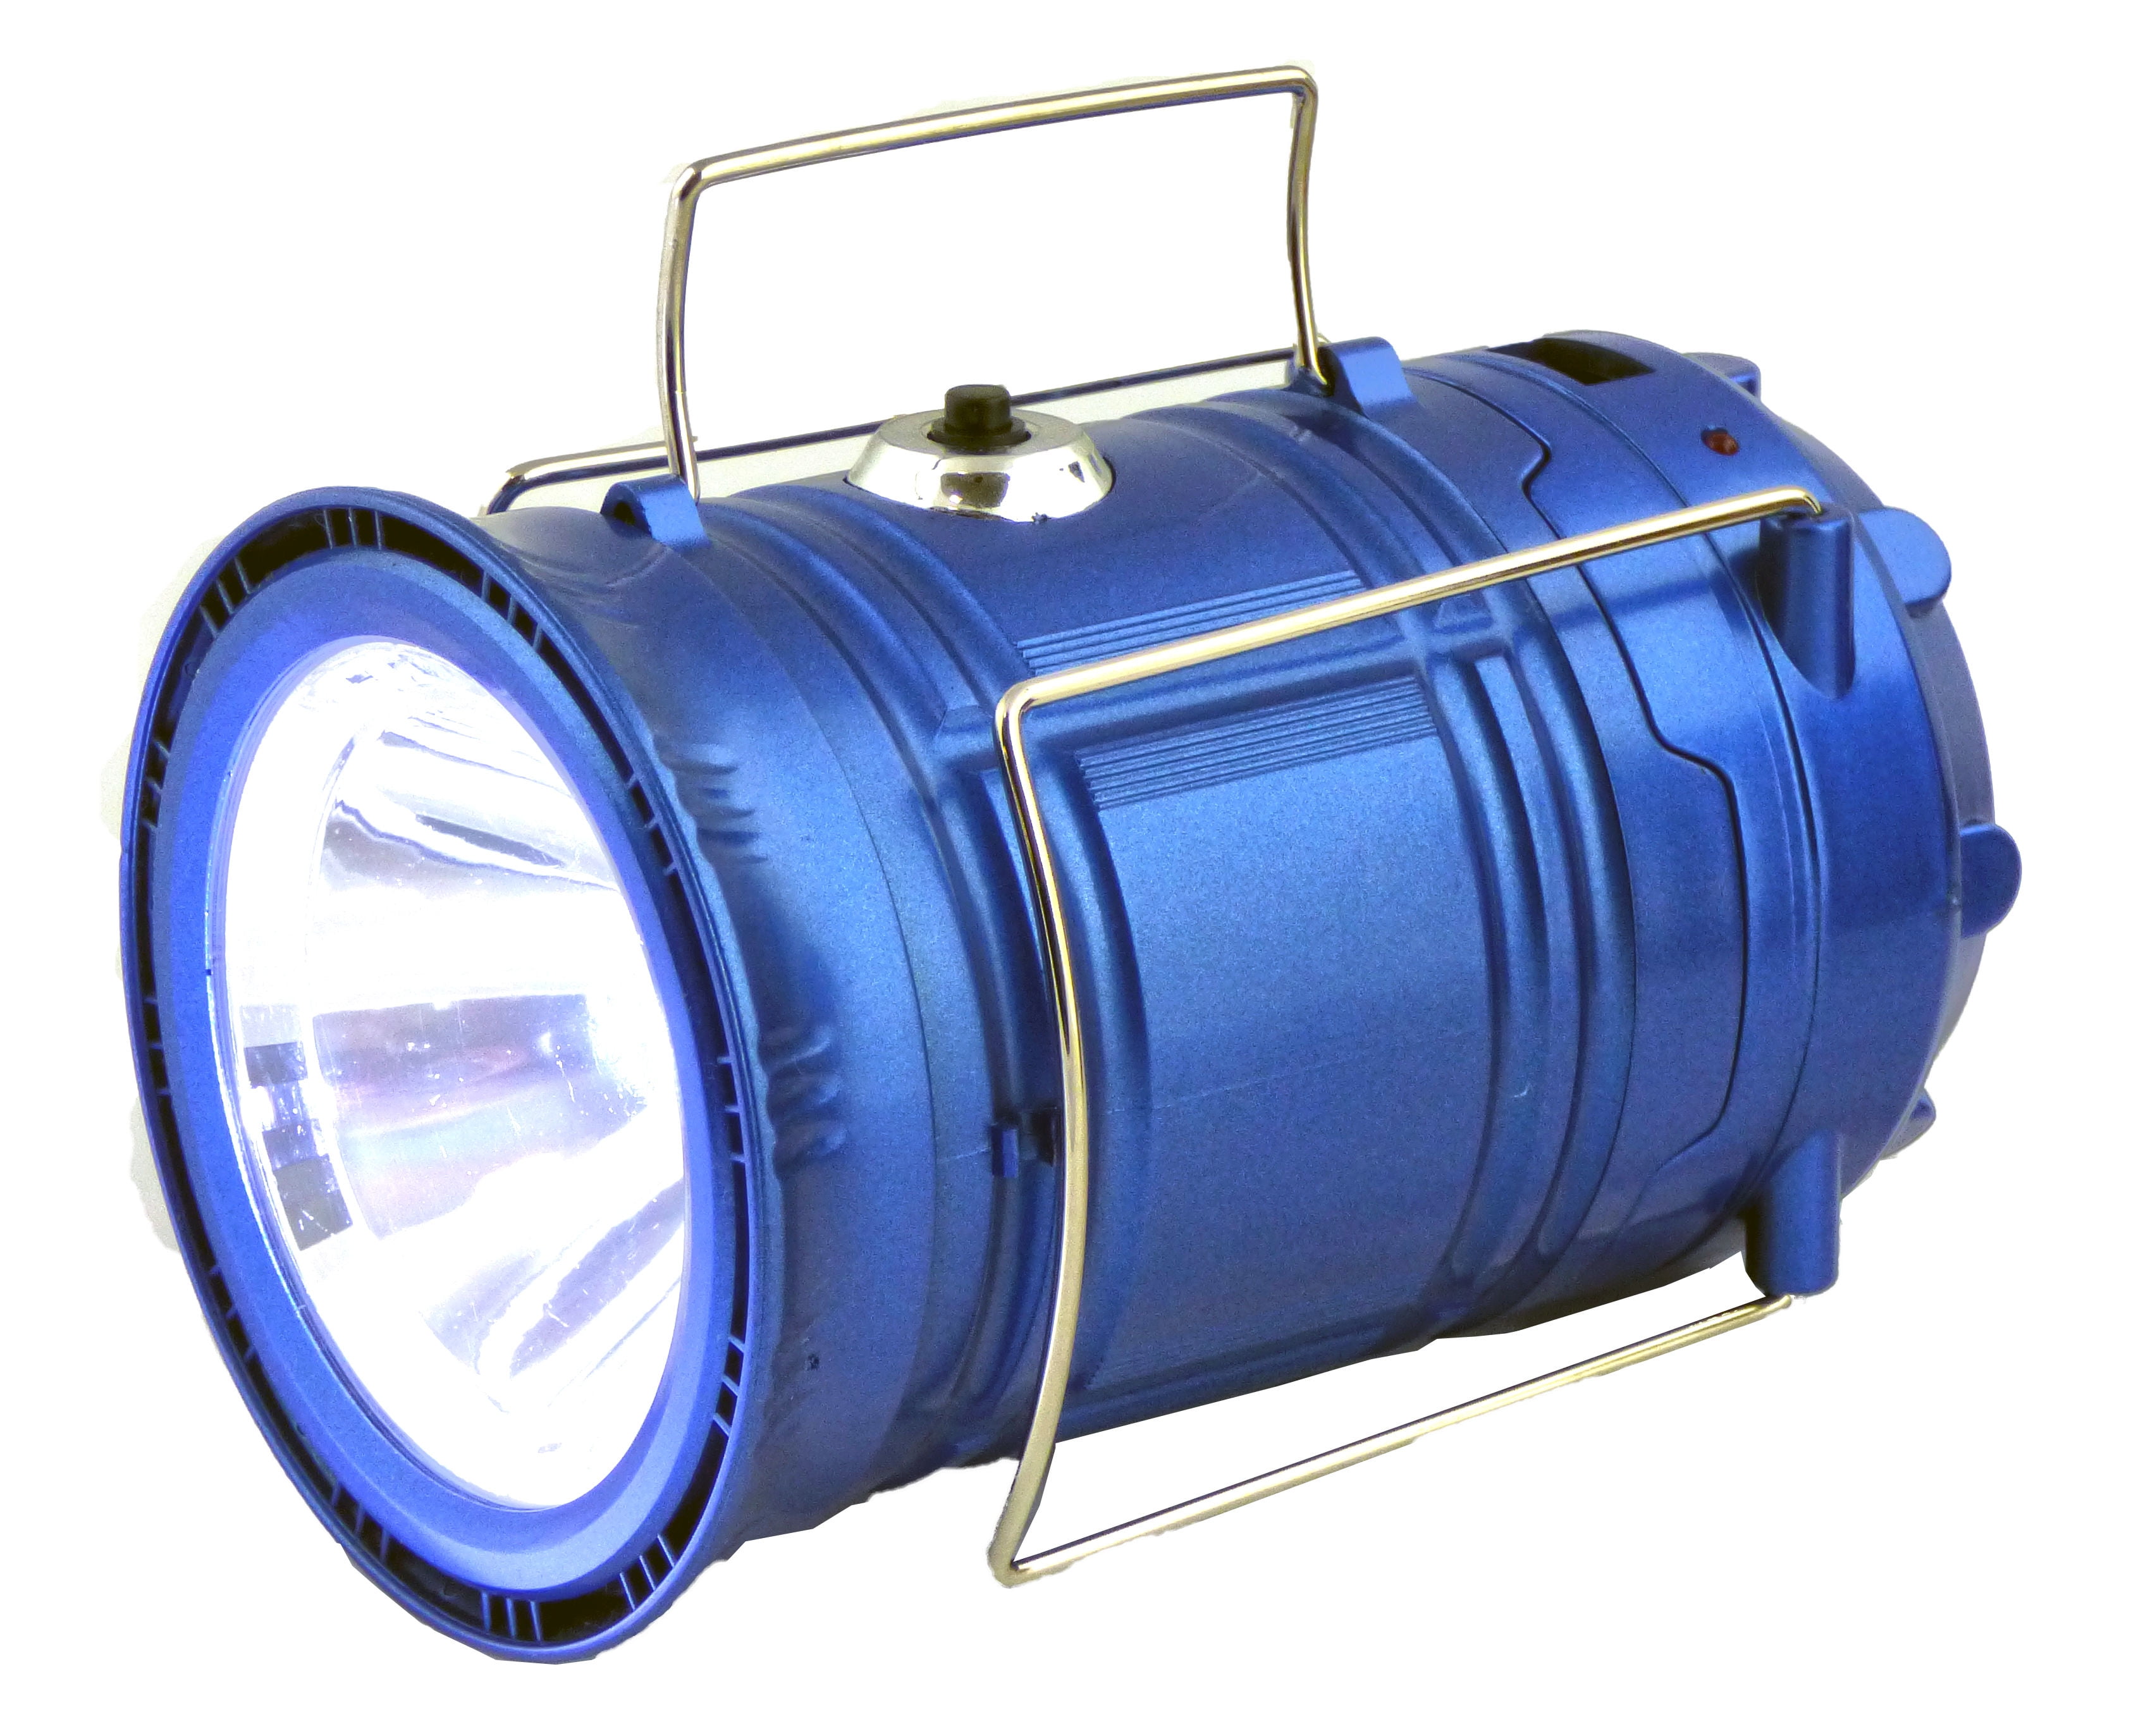 NEW - IMPROVED 3-in-1 Solar Collapsible Lantern | JPIN Supply